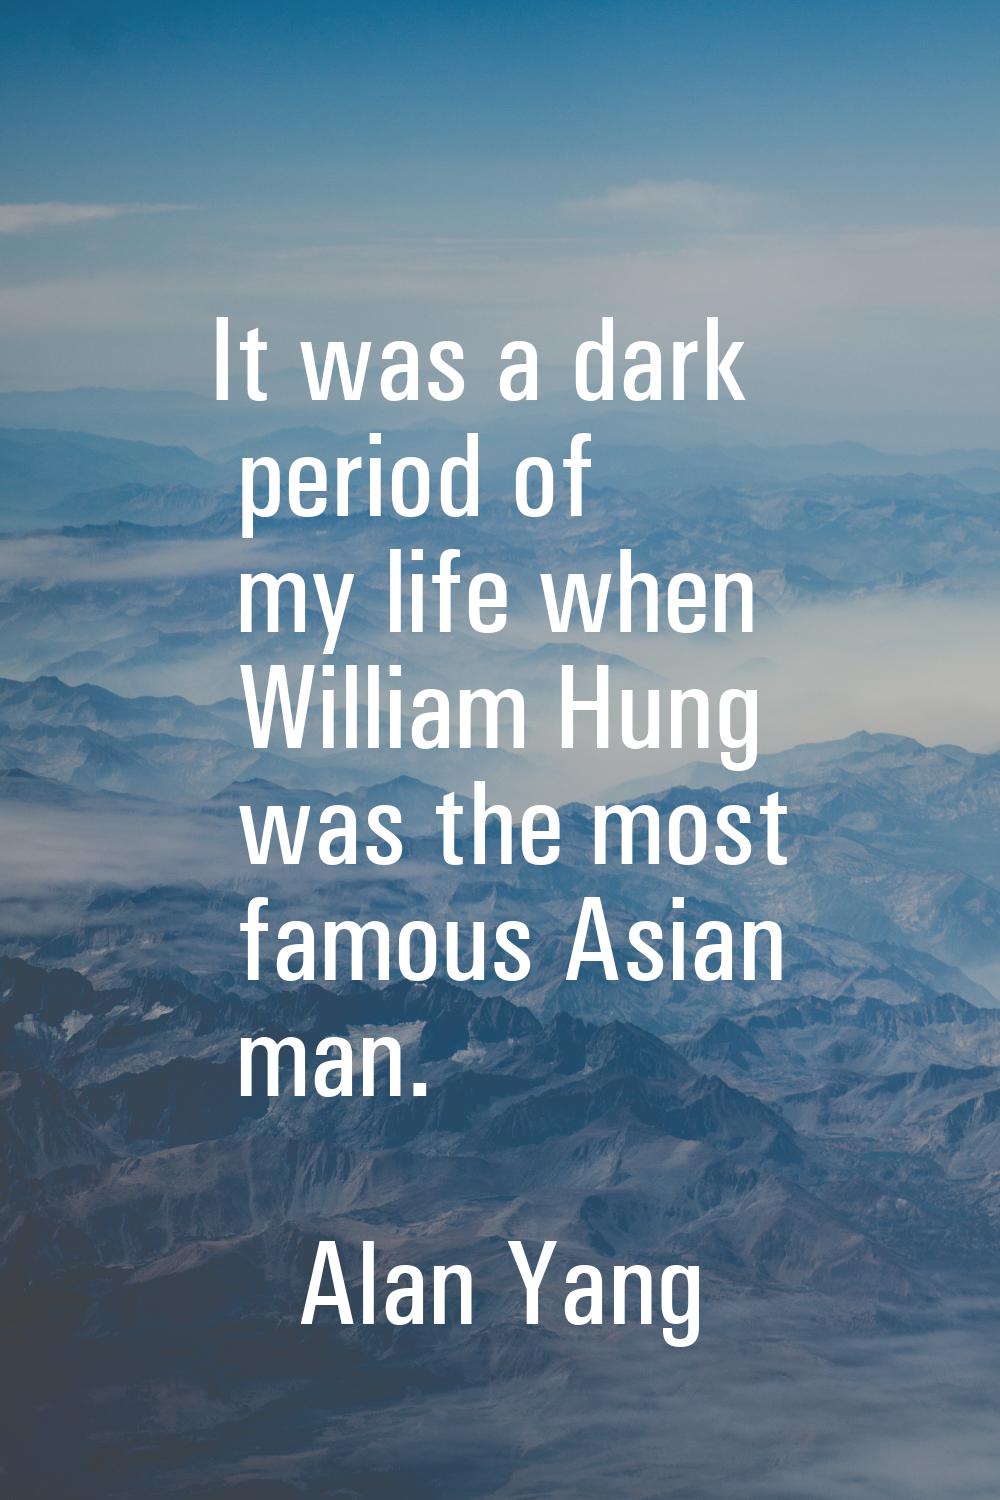 It was a dark period of my life when William Hung was the most famous Asian man.